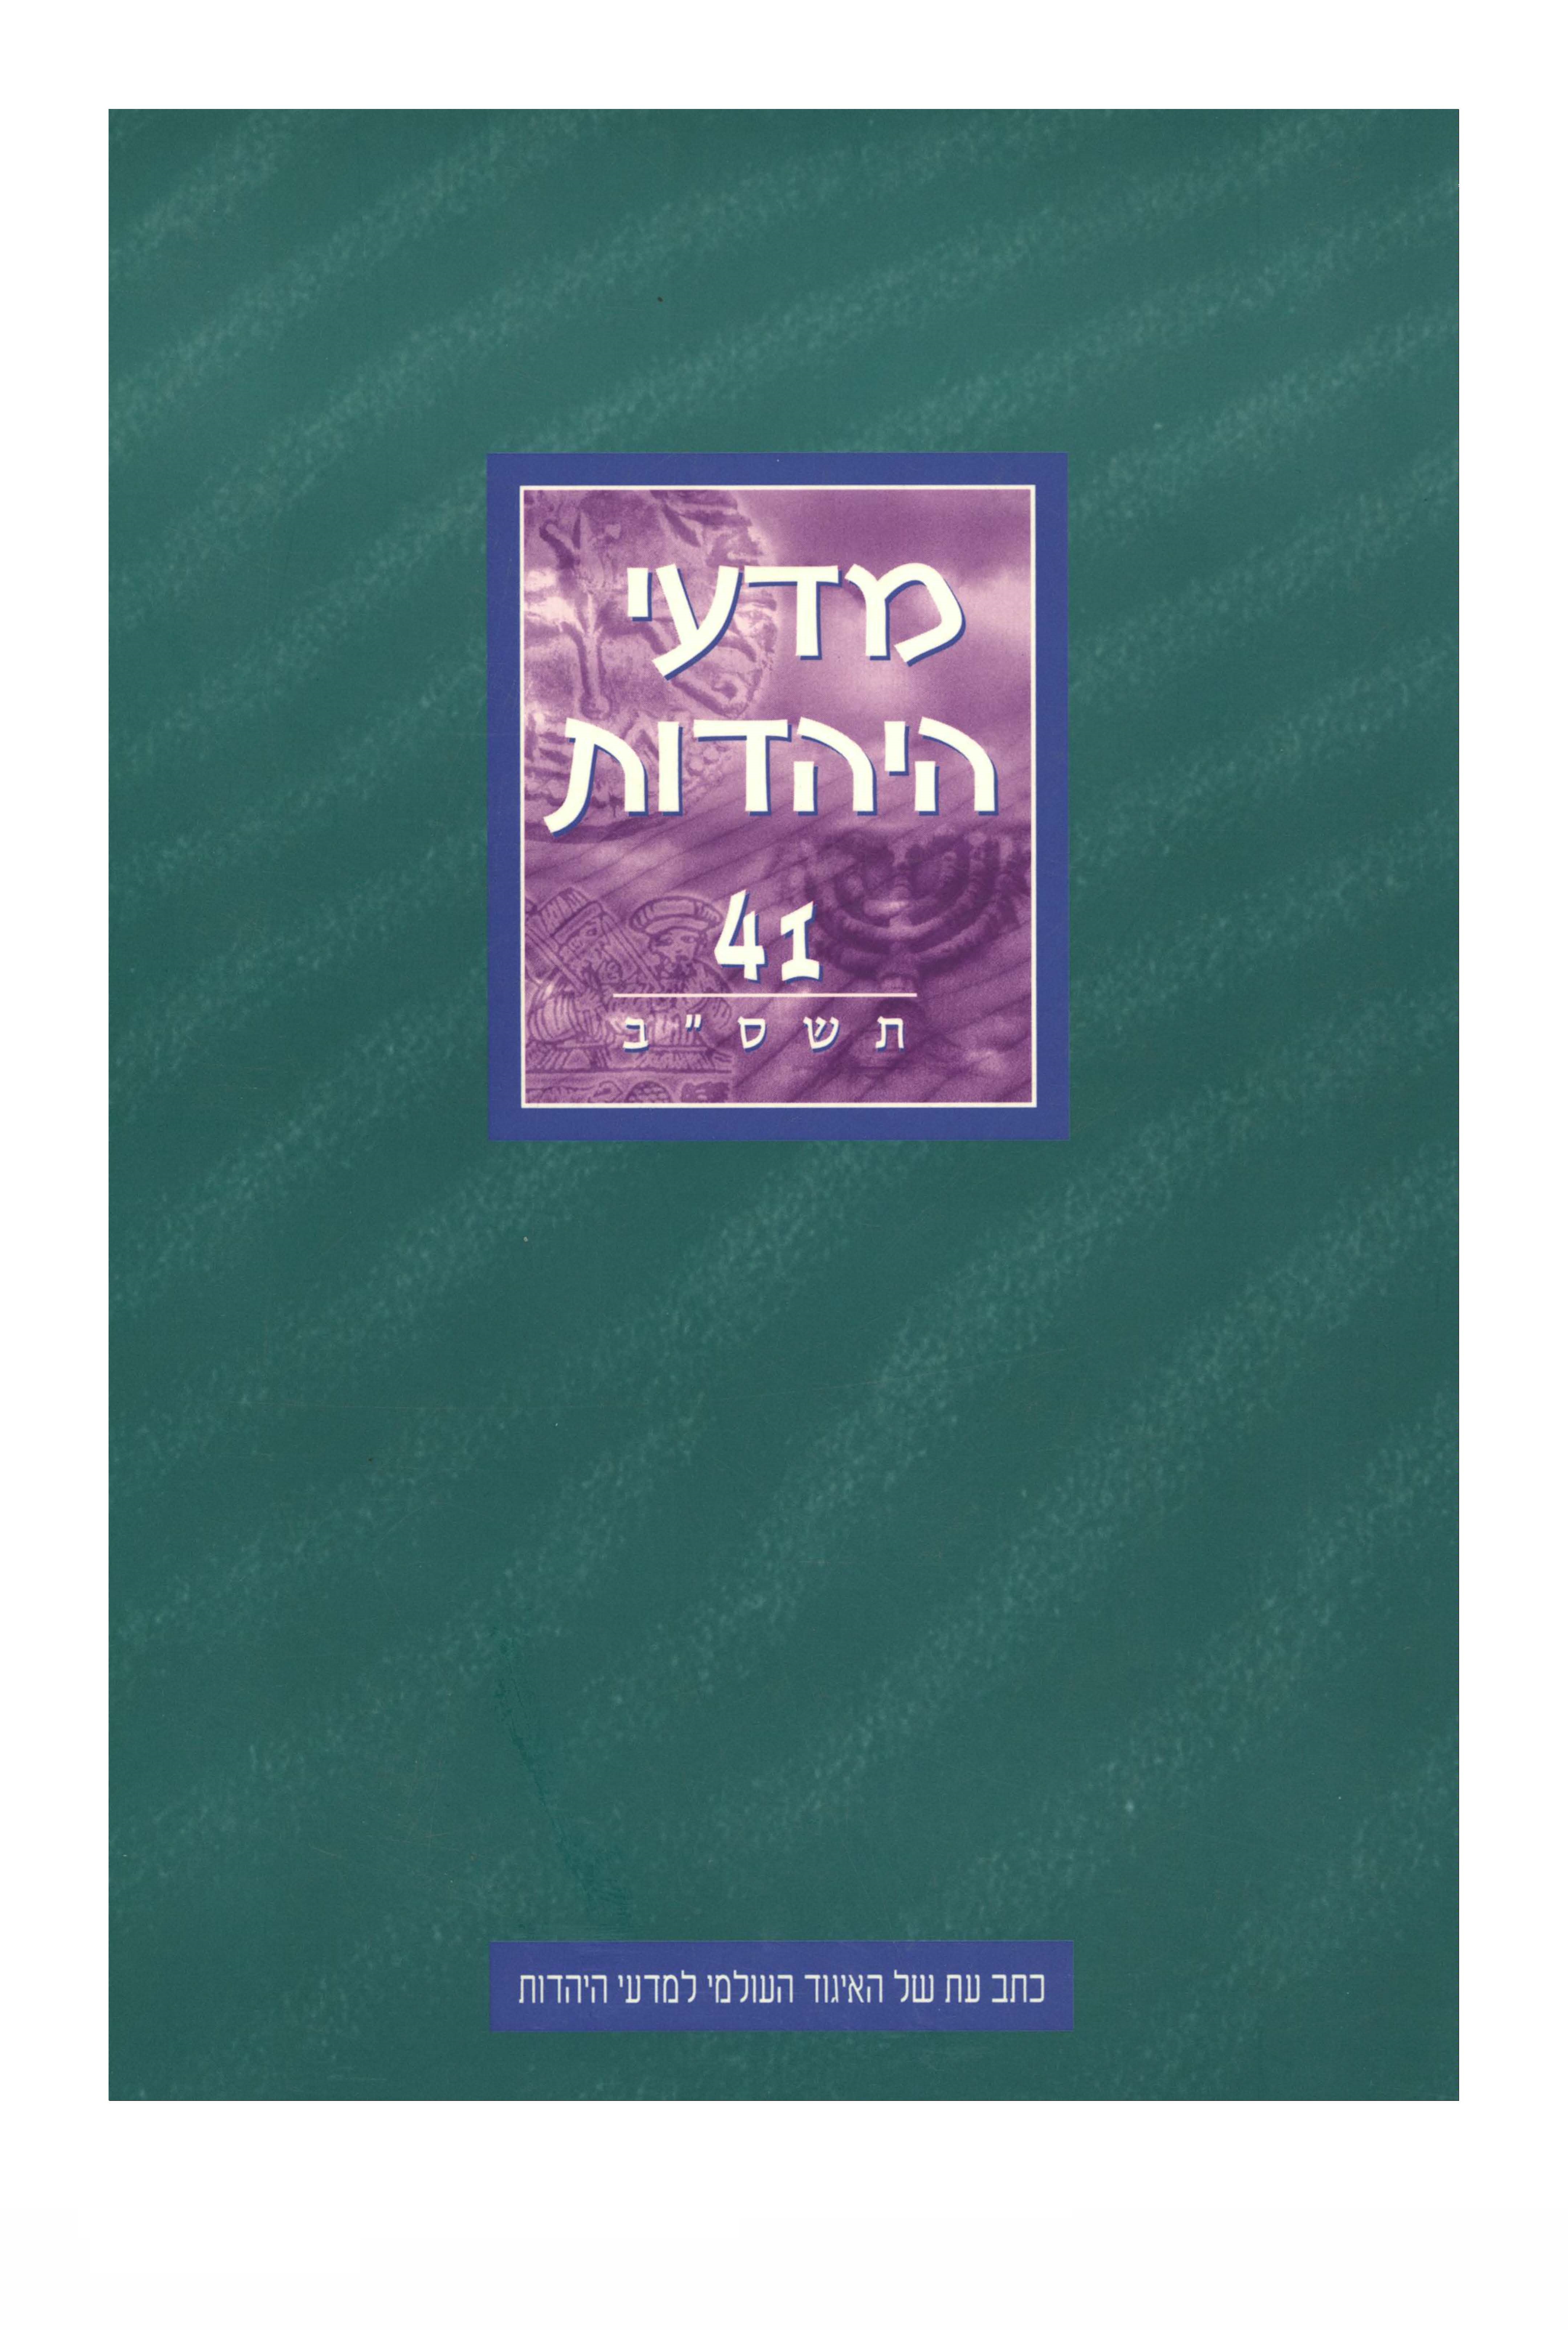 green cover with blue rectangle with Hebrew script